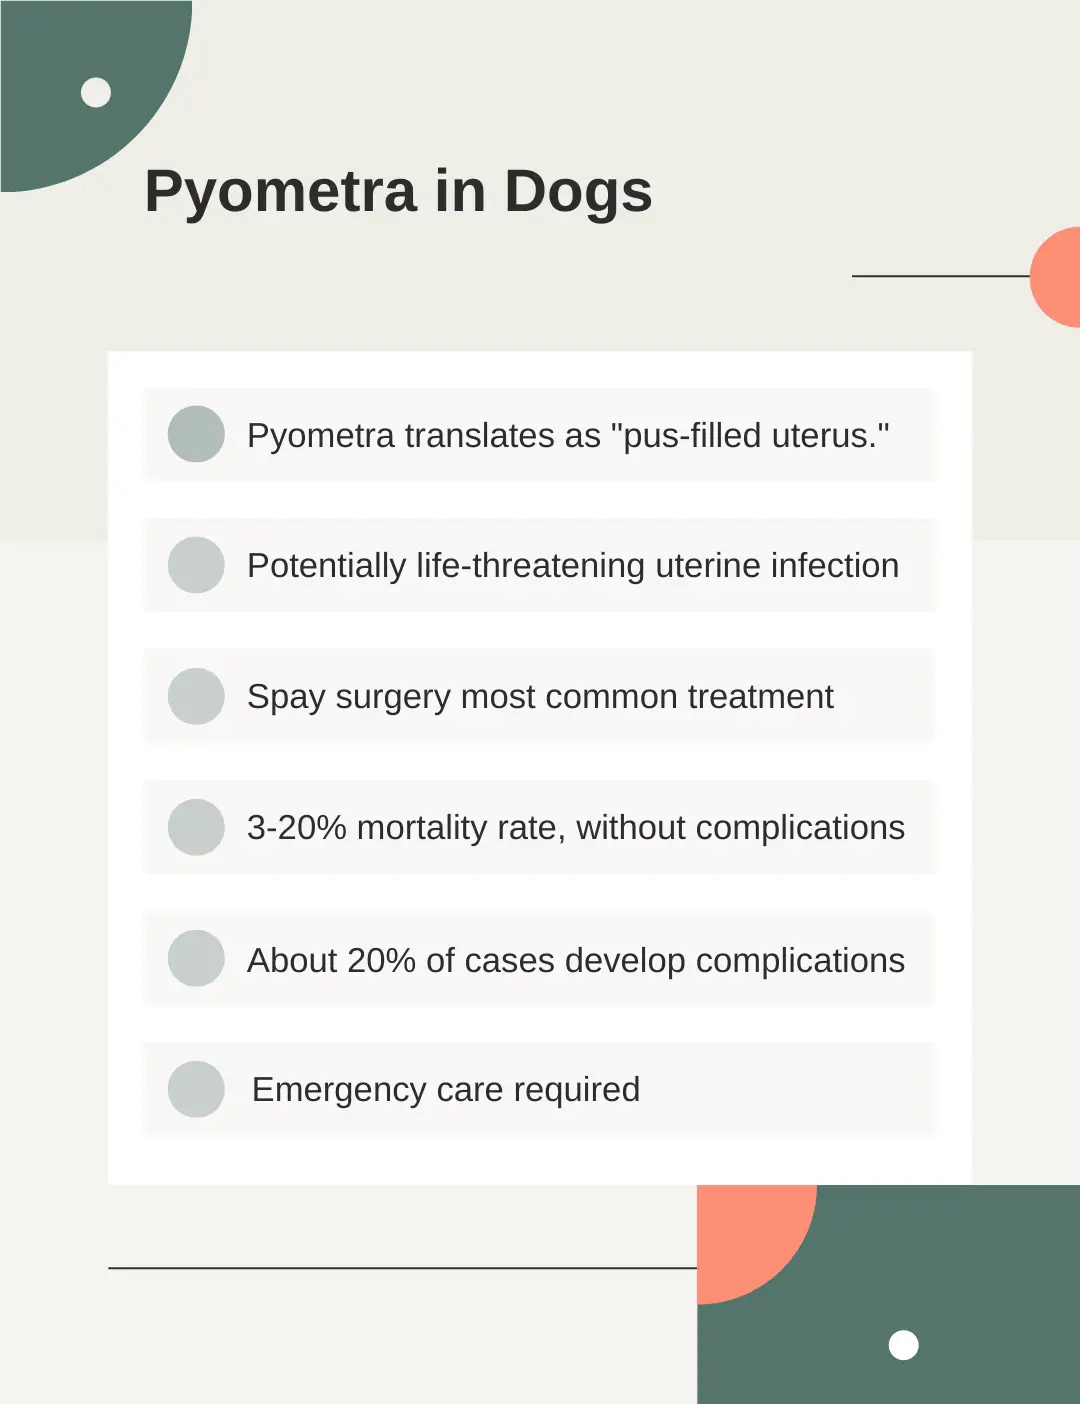 pyometra in dogs stats graphic